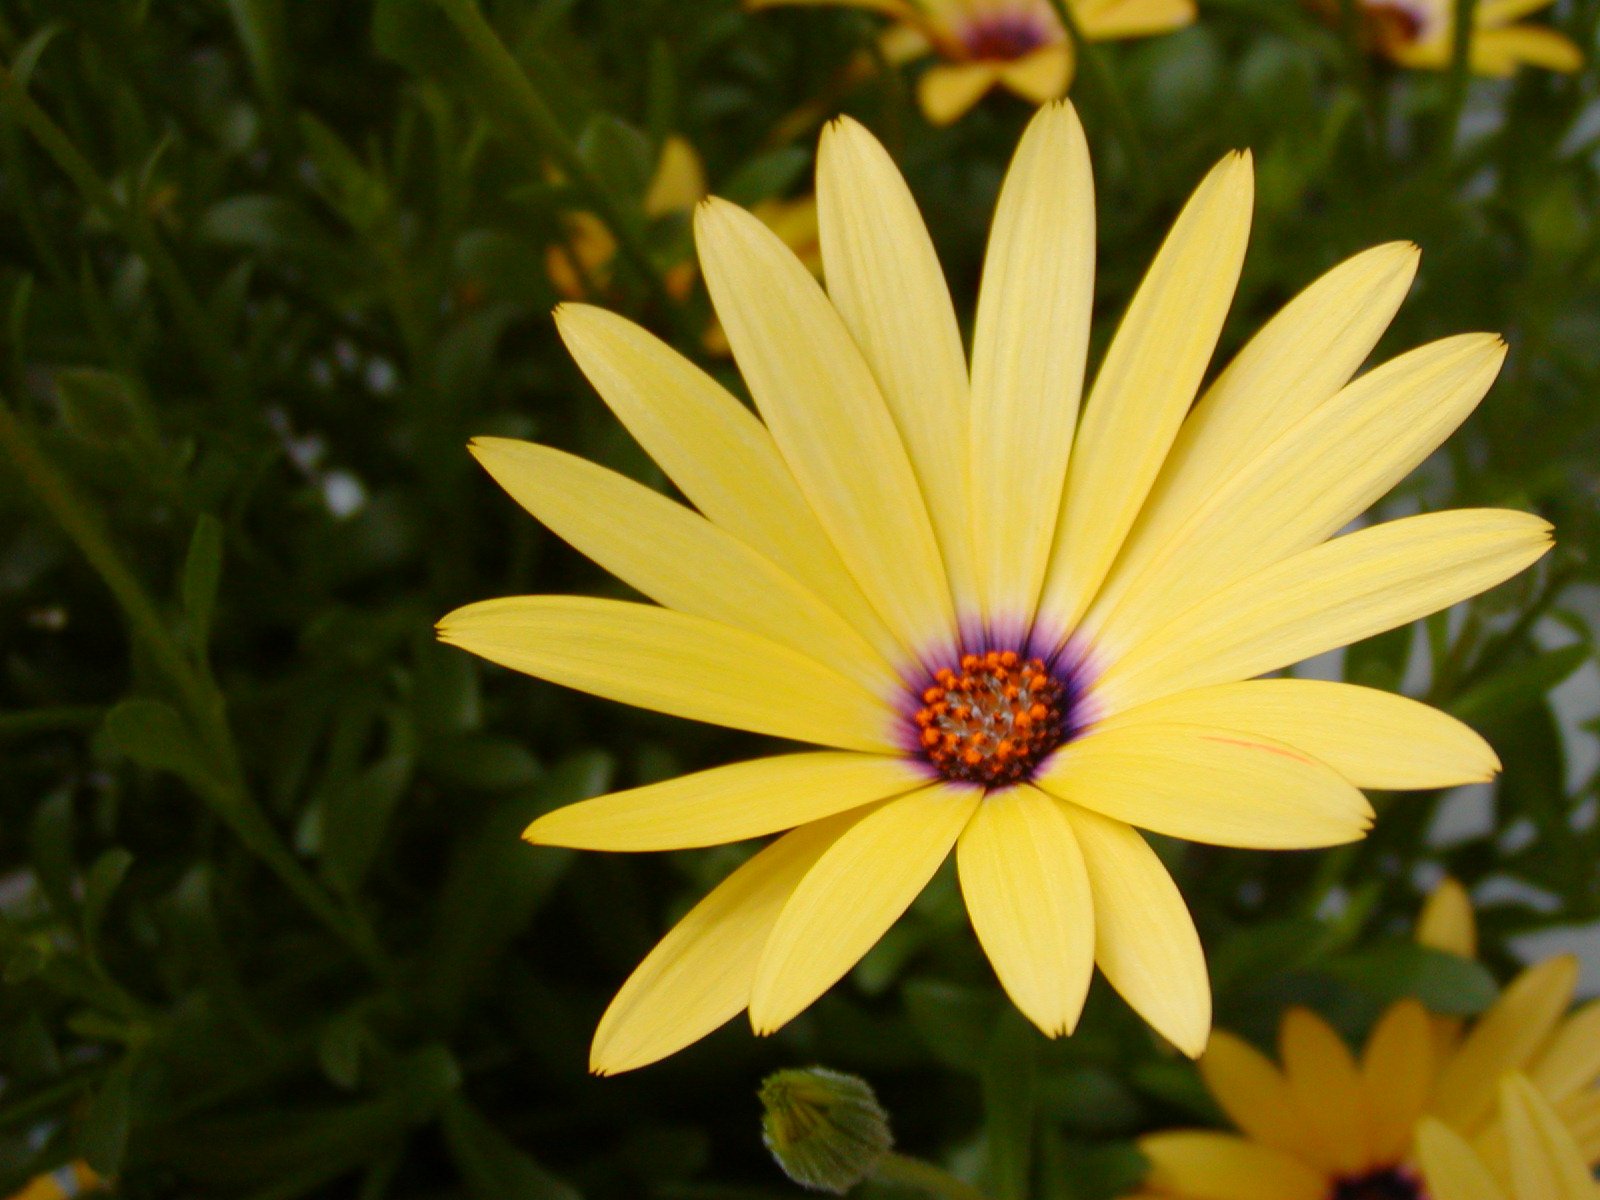 large, yellow flowers with small purple centers in the middle